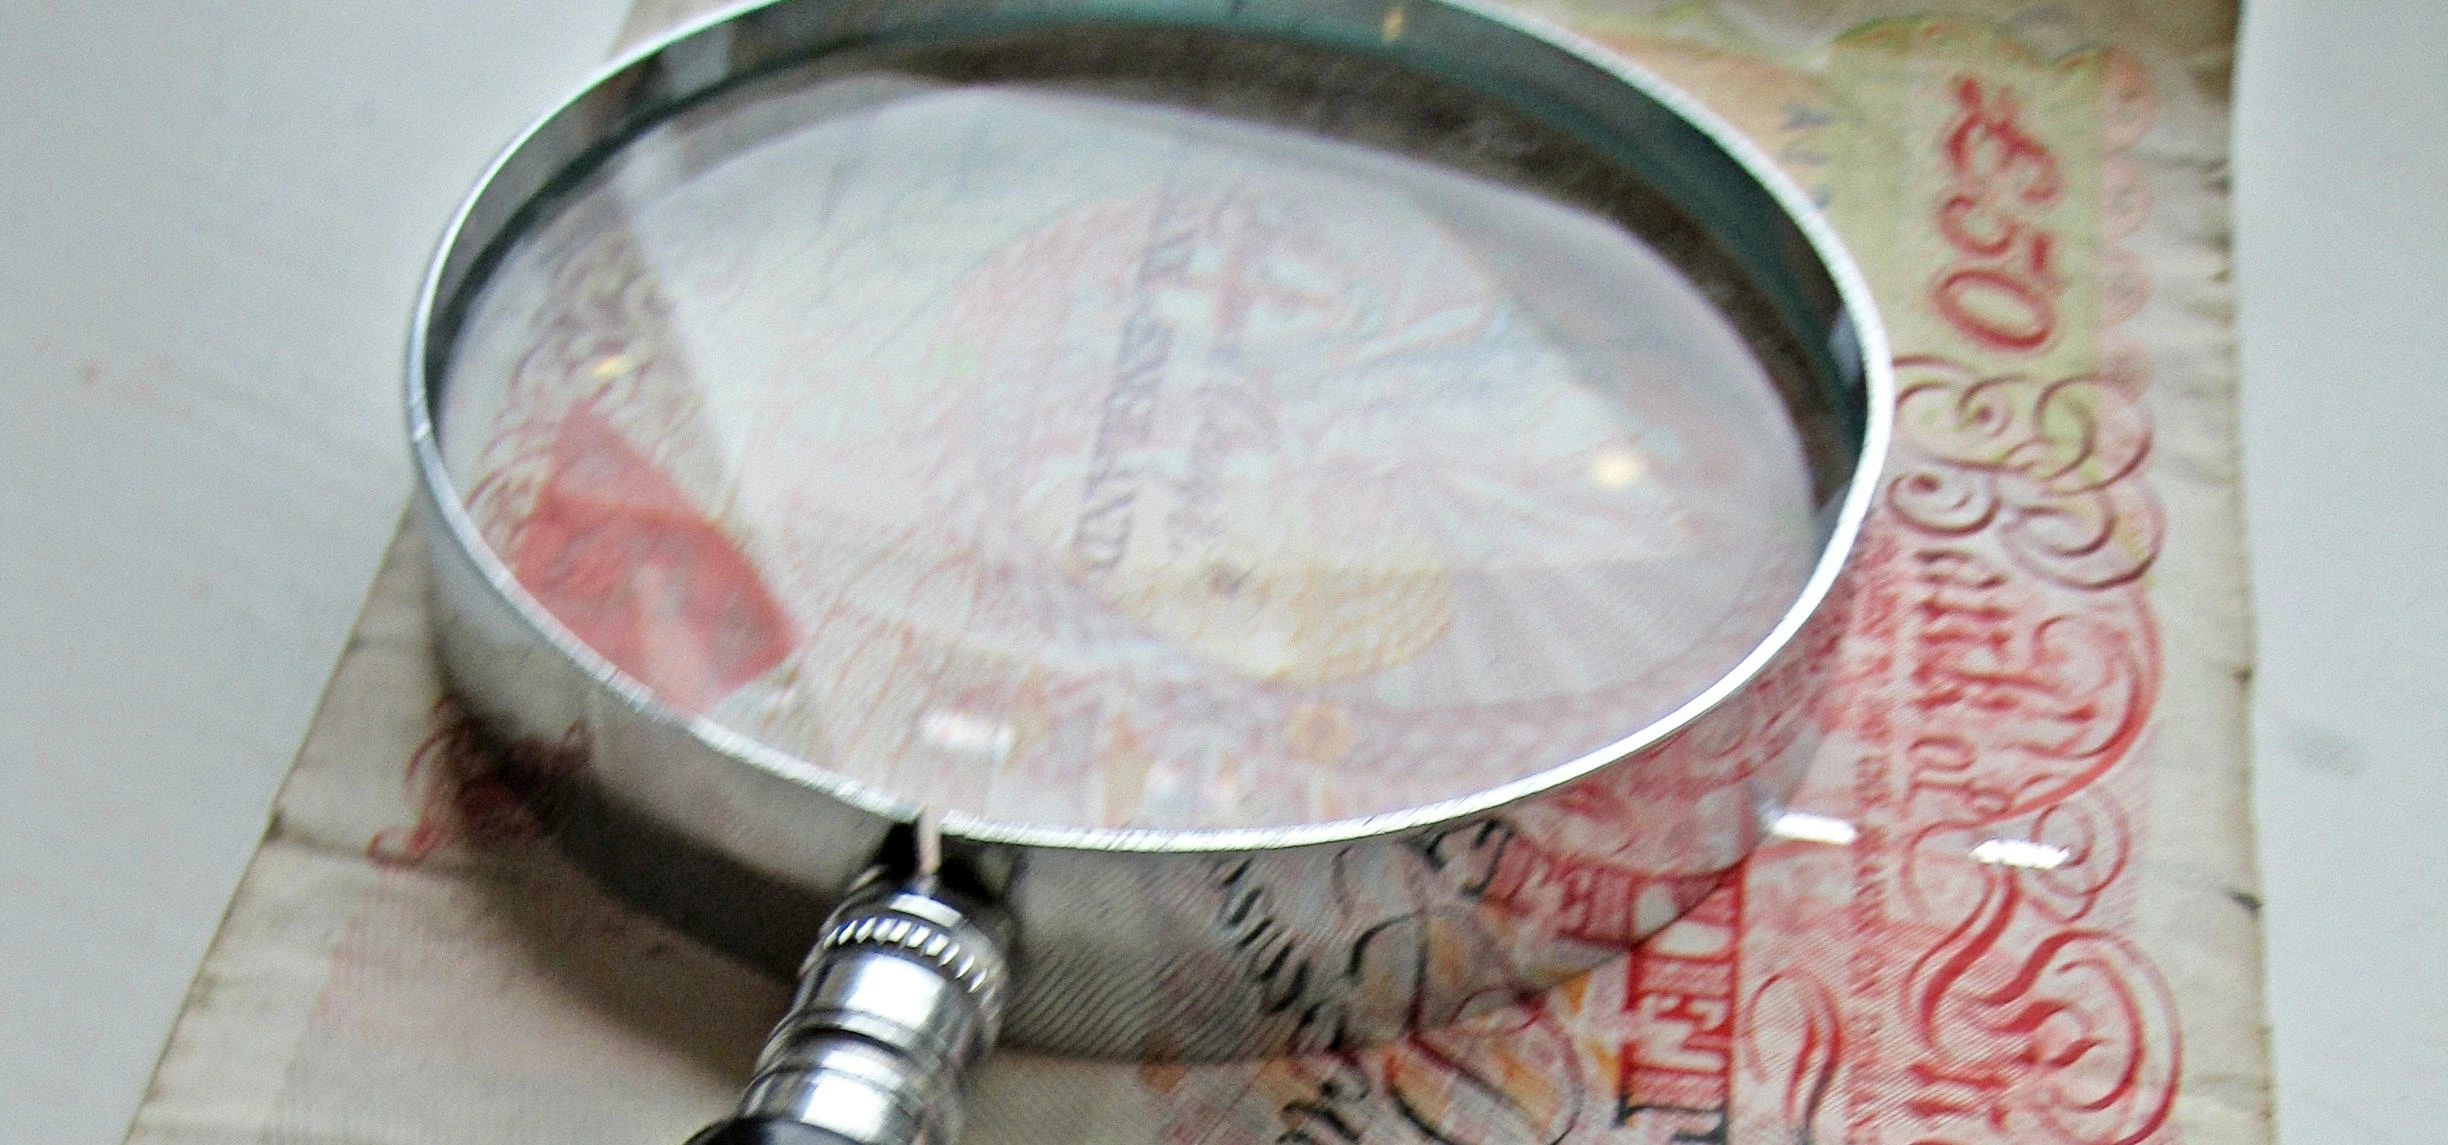 Magnify glass and 50 pound note